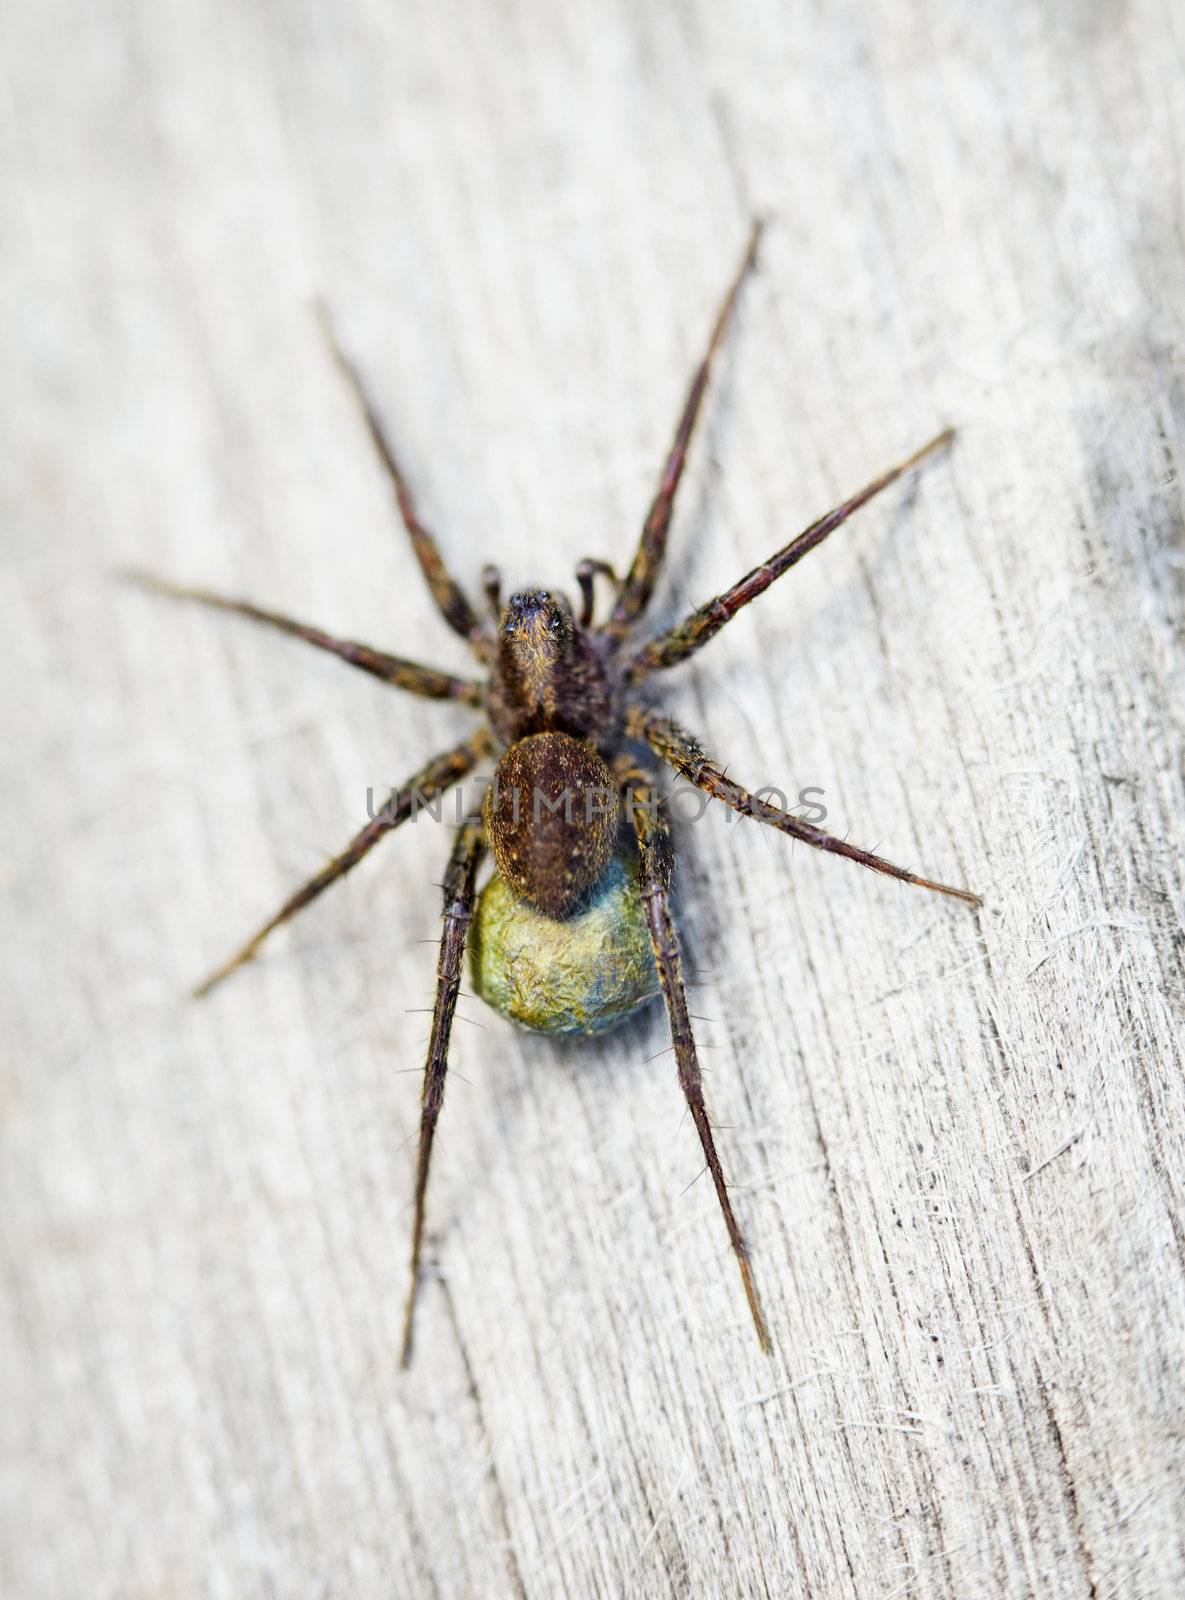 Brown spider on the wood surface - Lycosidae